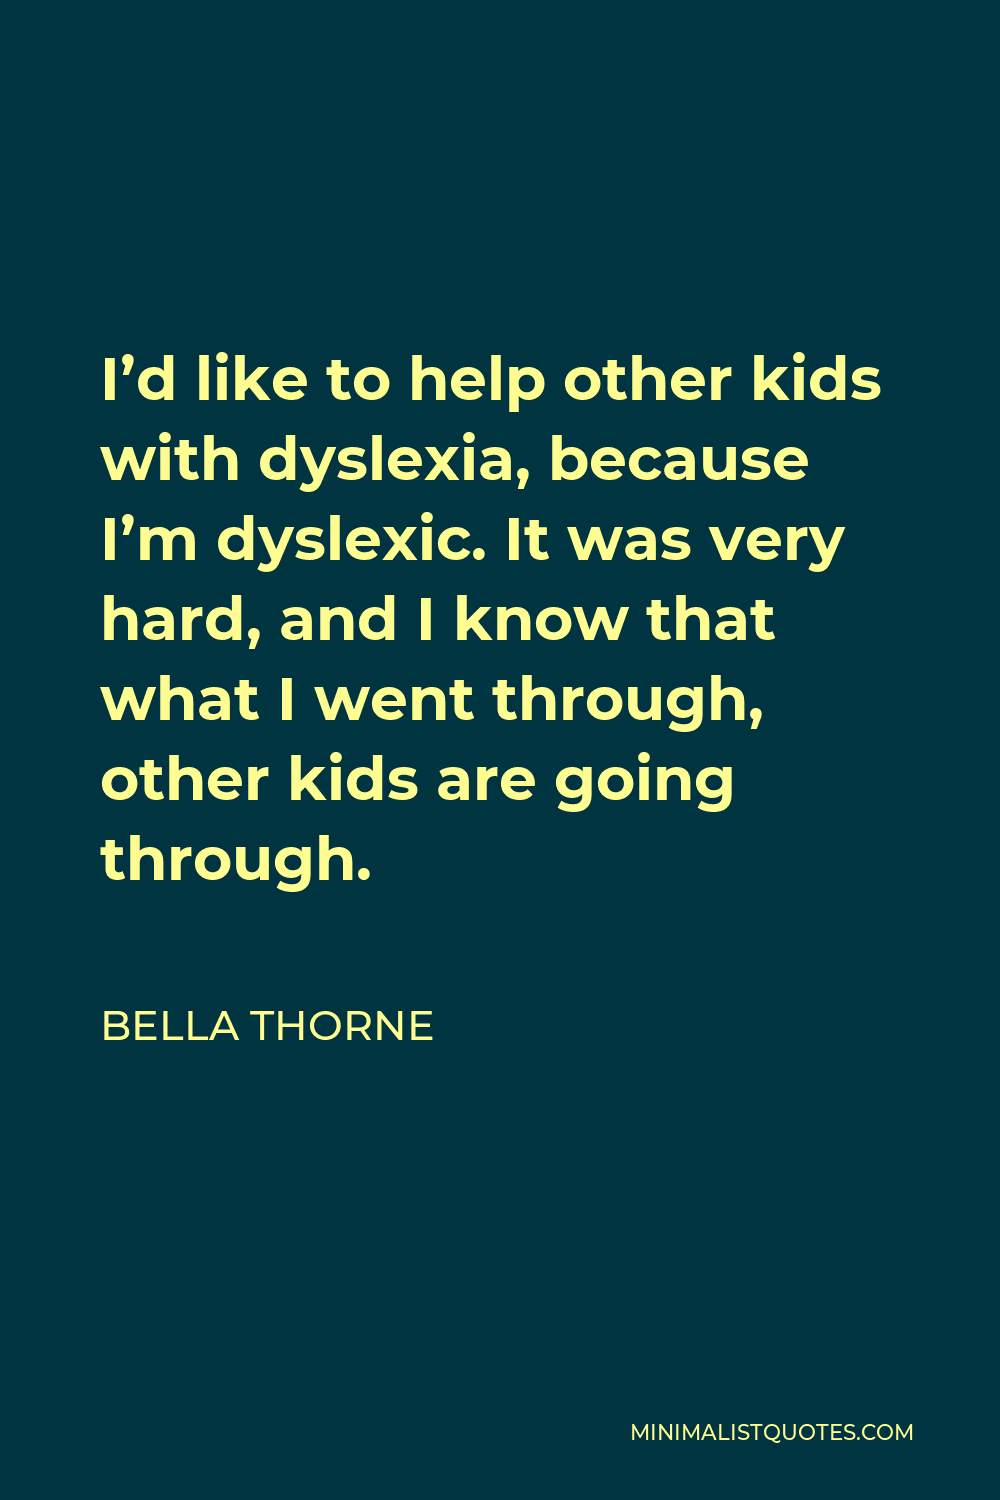 Bella Thorne Quote - I’d like to help other kids with dyslexia, because I’m dyslexic. It was very hard, and I know that what I went through, other kids are going through.